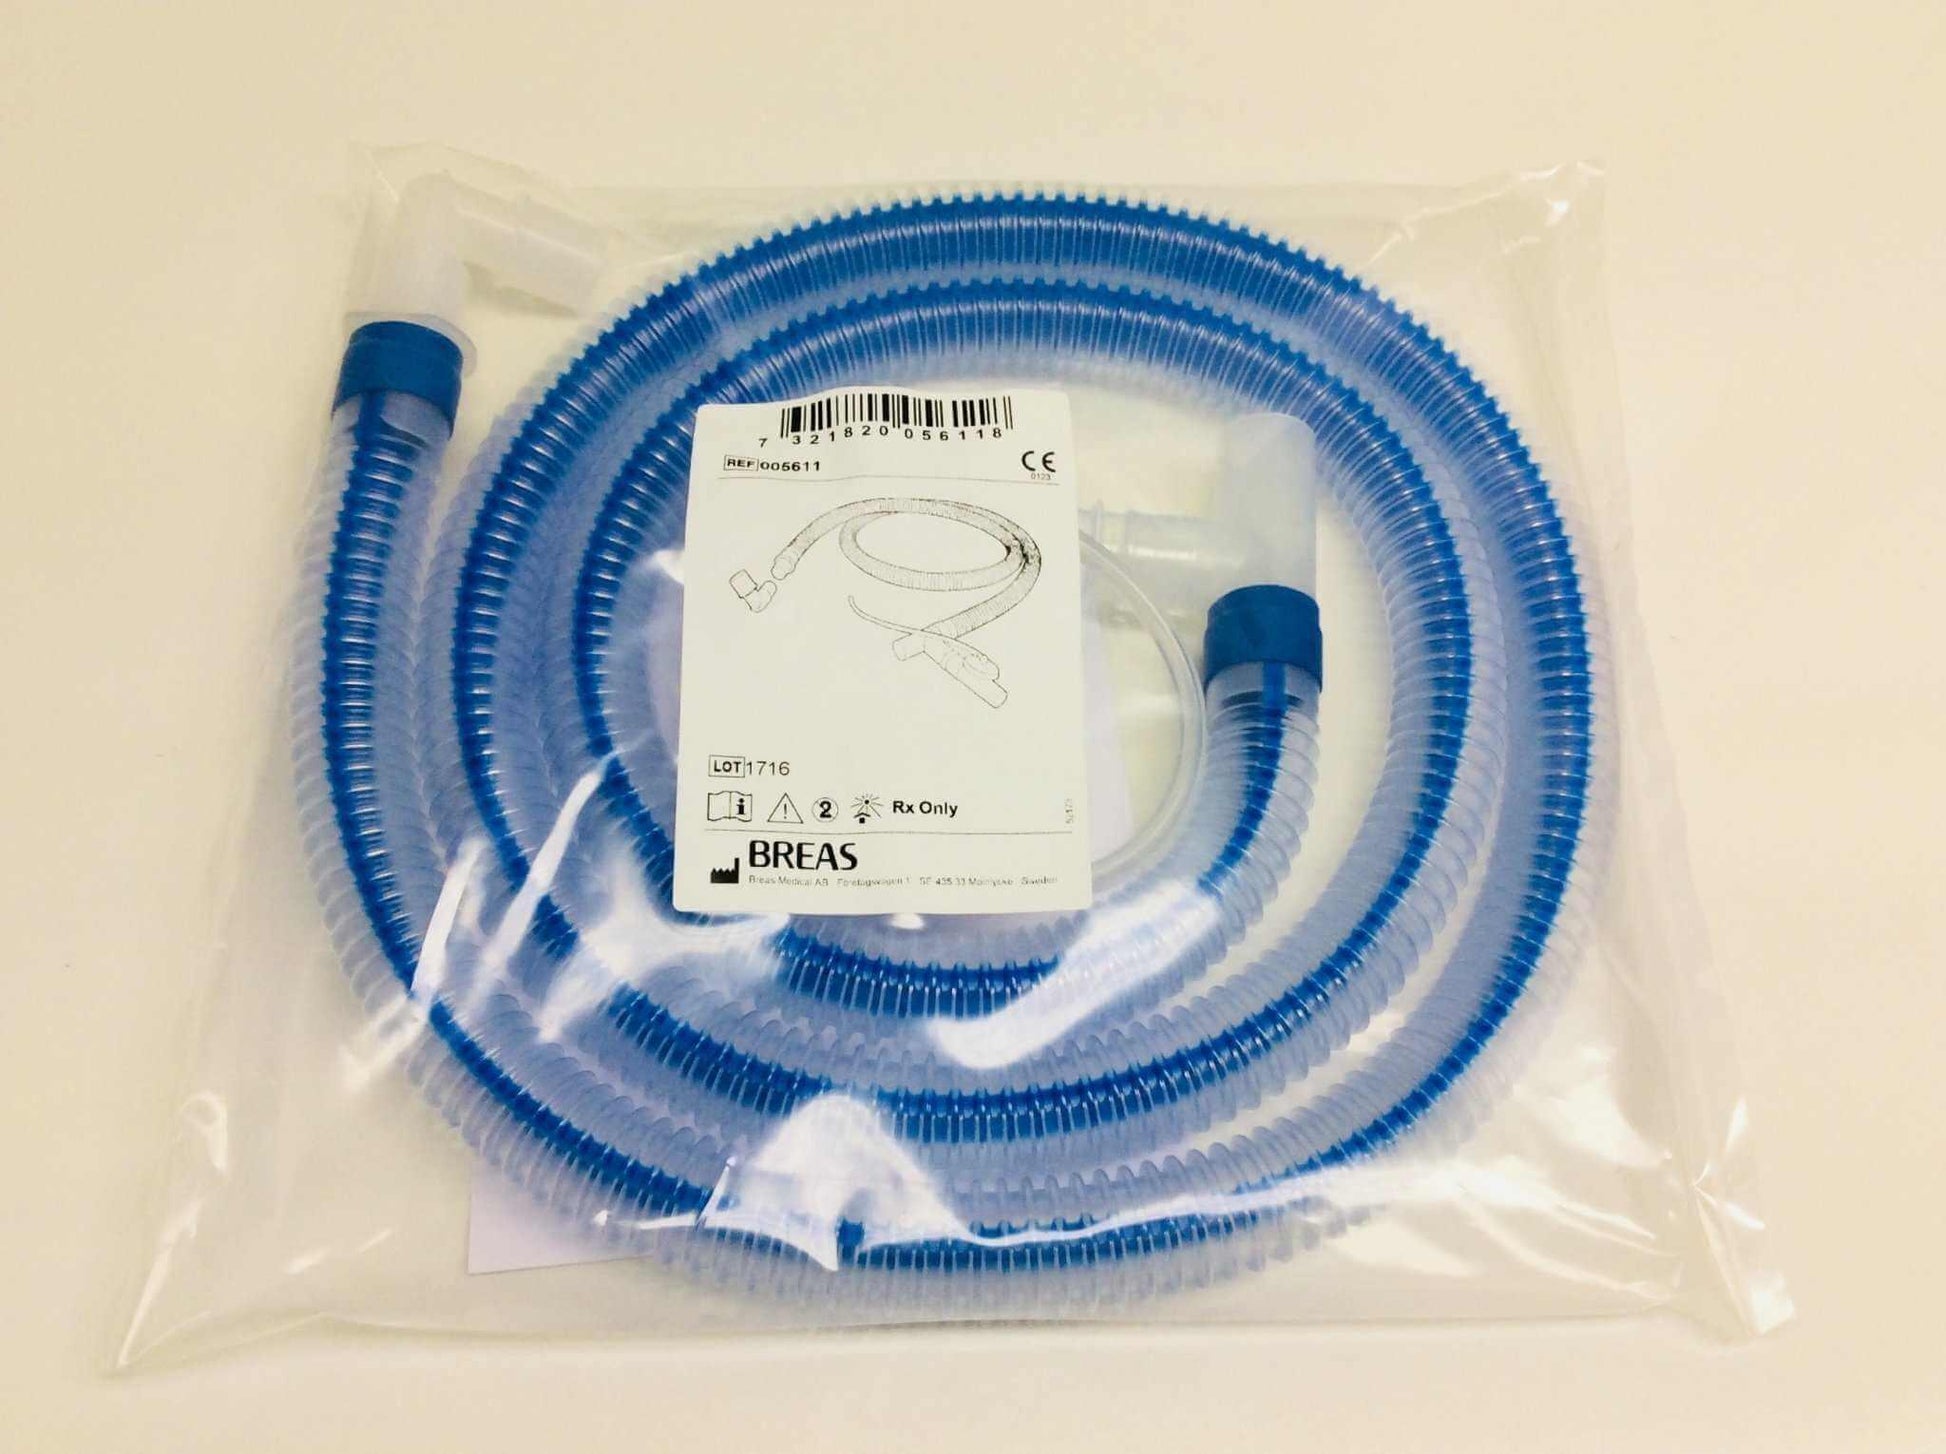 Case of 10 NEW Breas HDM Vivo 50 Medical Ventilator Dual Limp with Exhalation Valve Disposable Therapy Patient Circuit 005611 FREE Shipping - MBR Medicals